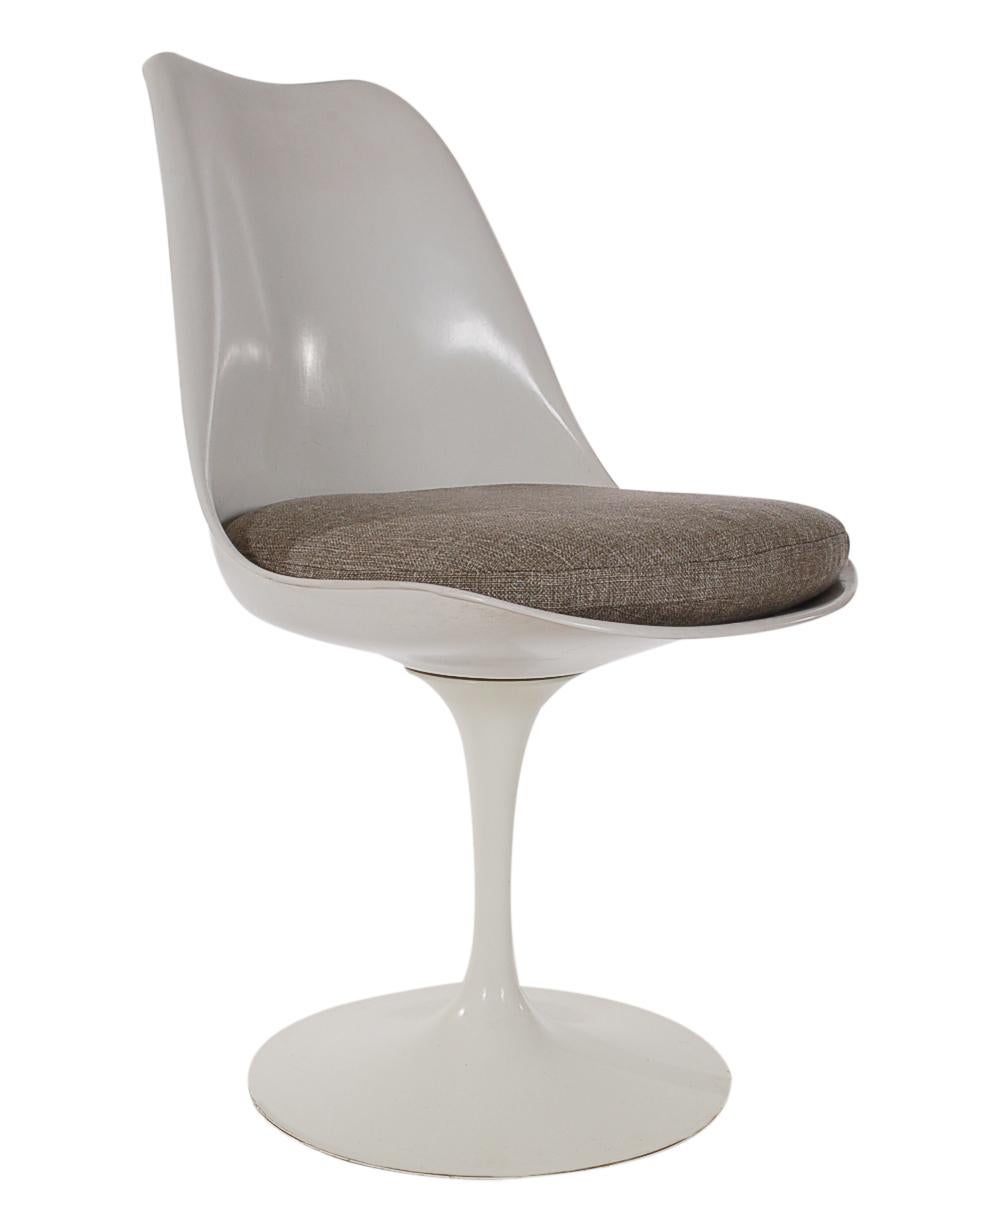 A beautiful vintage set of white tulip chairs designed by Eero Saarinen and produced by Knoll Associates. These chairs feature cast aluminum swiveling bases, fiberglass seats, and newly recovered seat cushions. All very clean condition and ready for